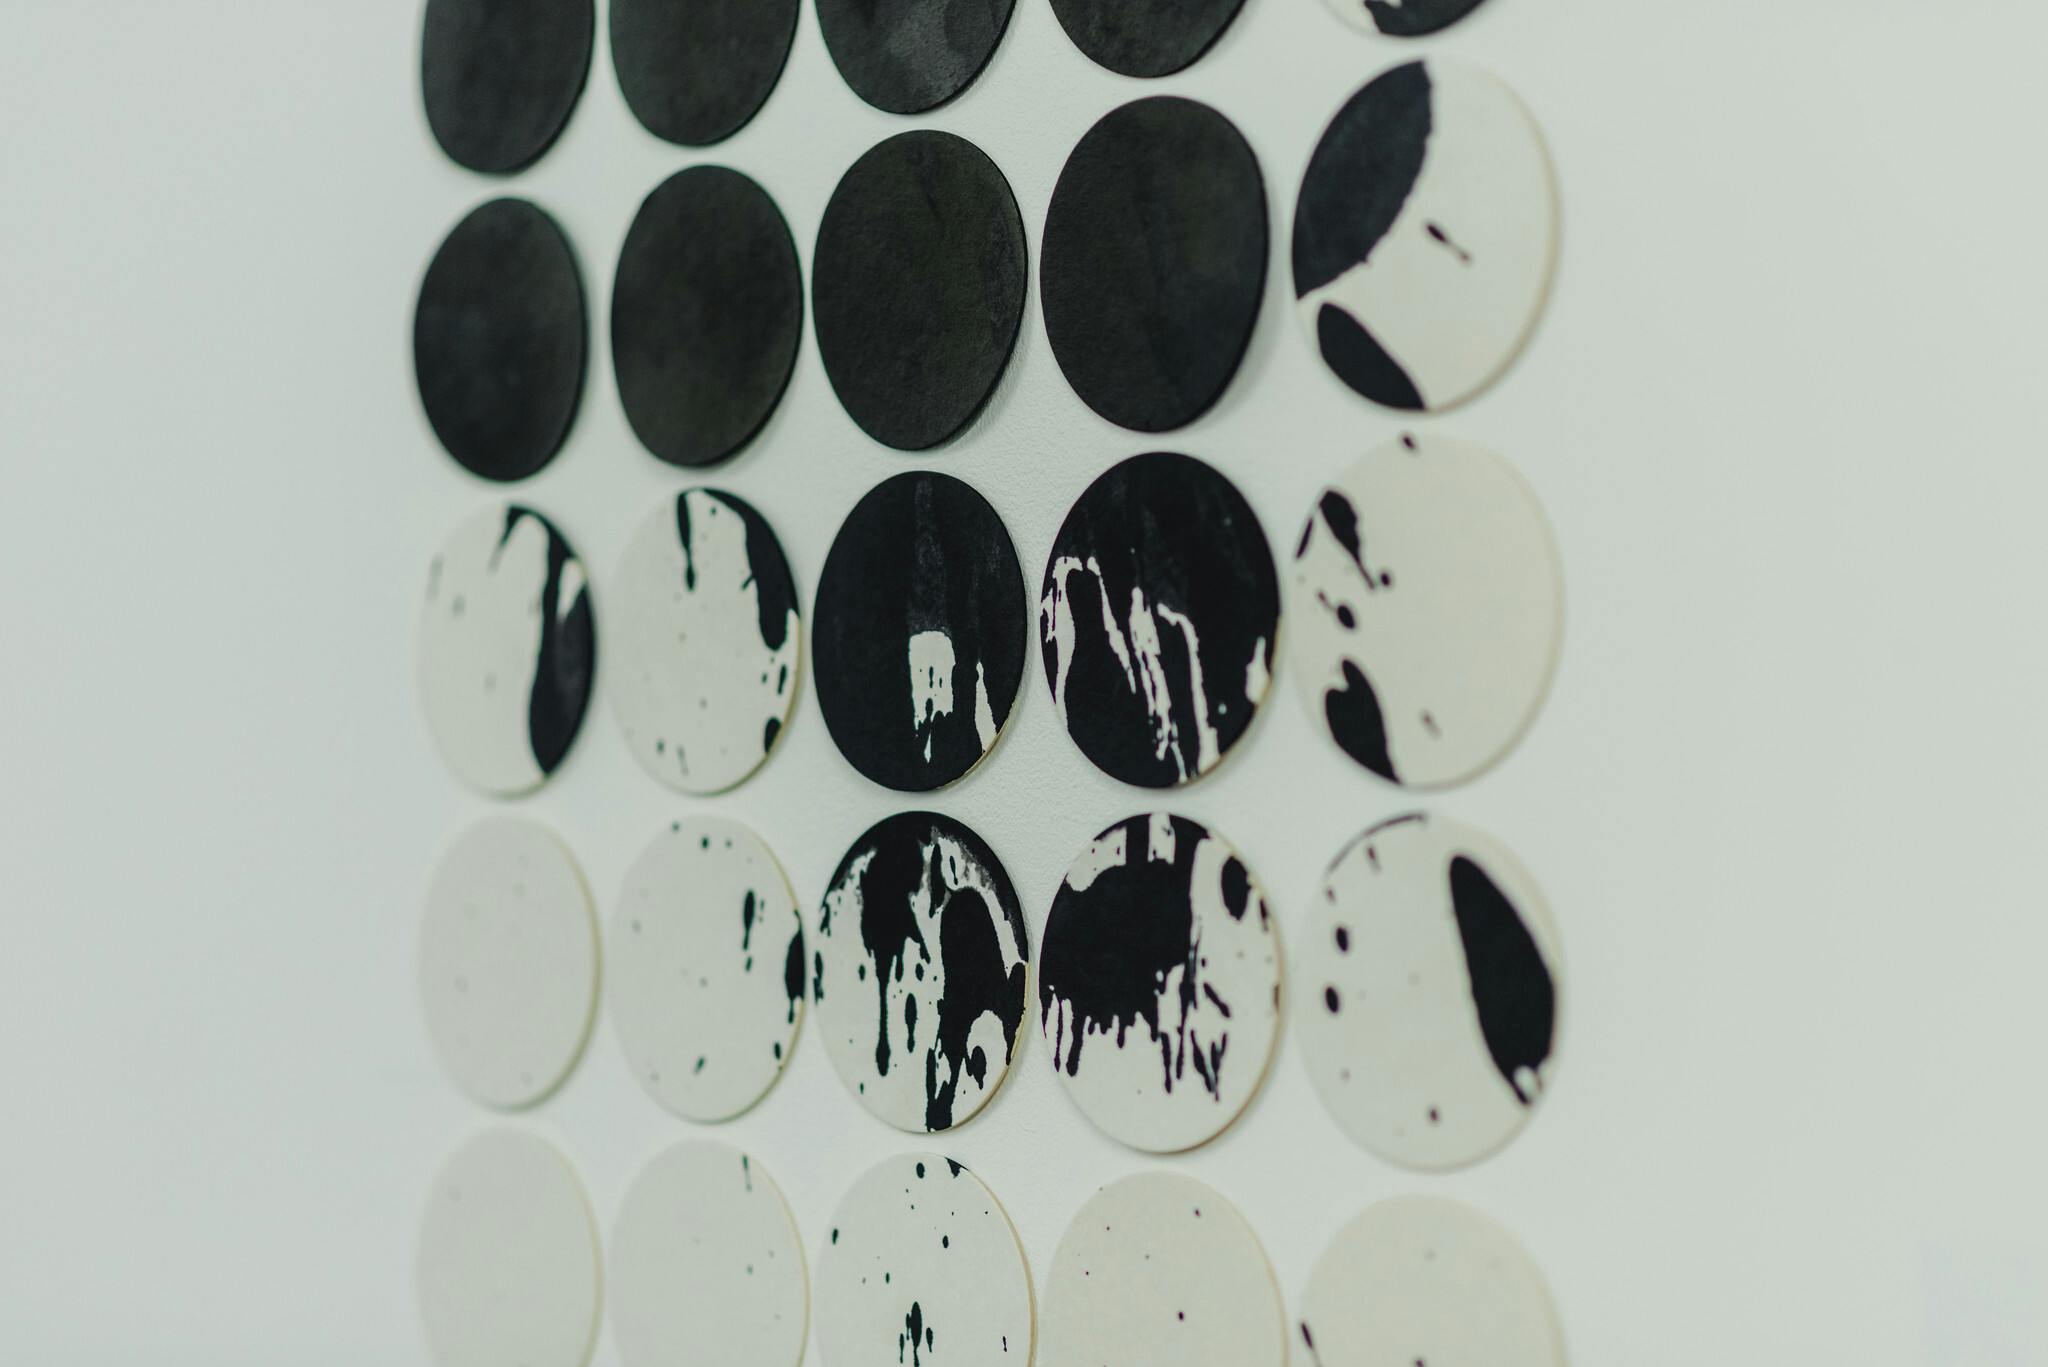 Work by Rebecca Alford which shows white paper discs with black paint dripped over them in a gradual pattern